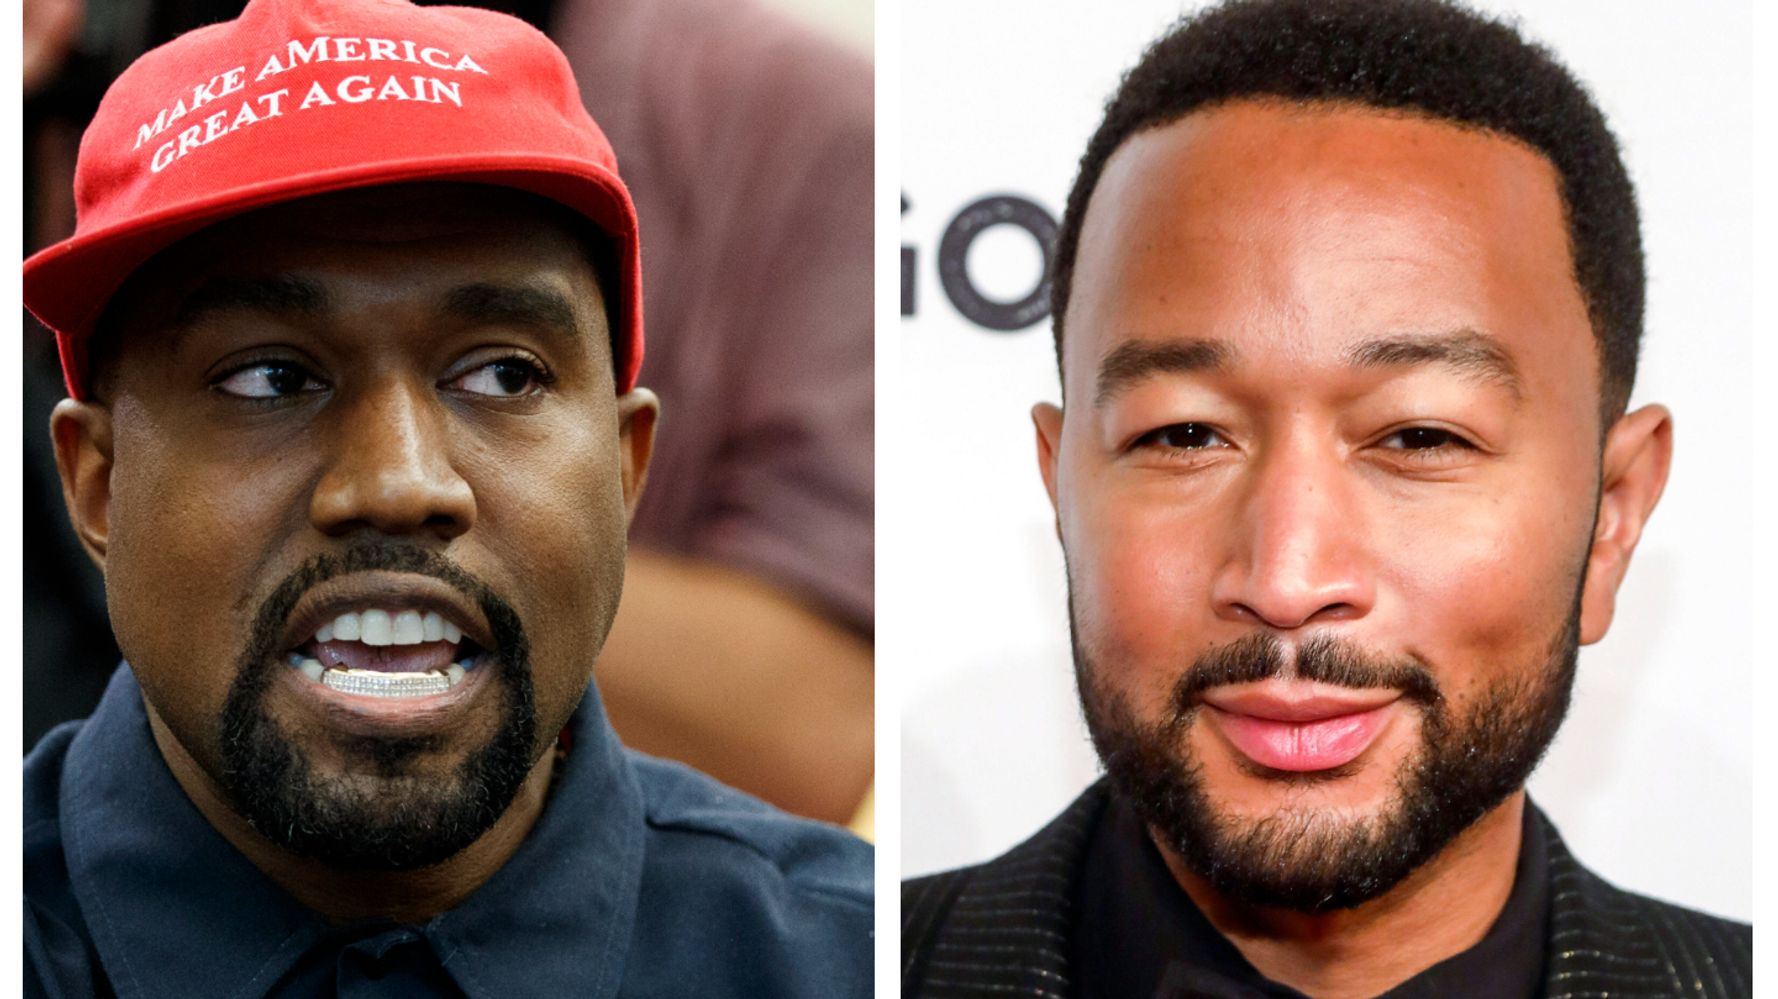 John Legend Says Kanye’s Support Of Trump Ruined Their Friendship